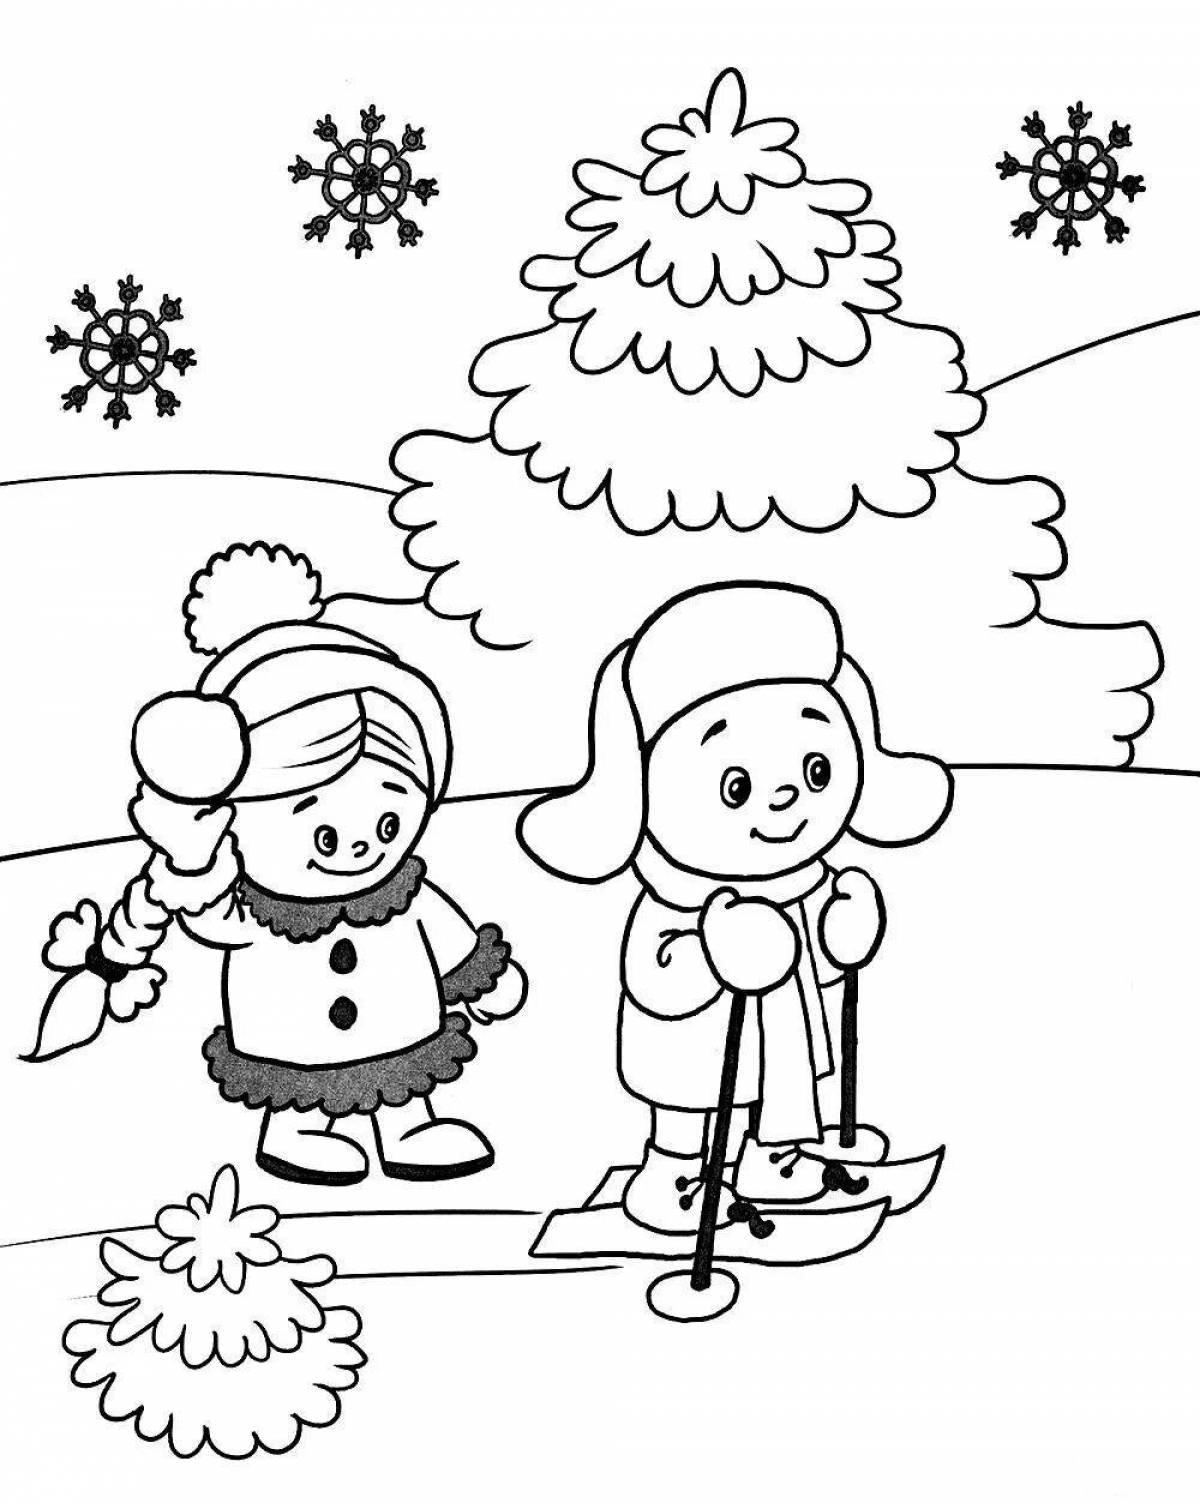 Playful winter coloring for children 6-7 years old